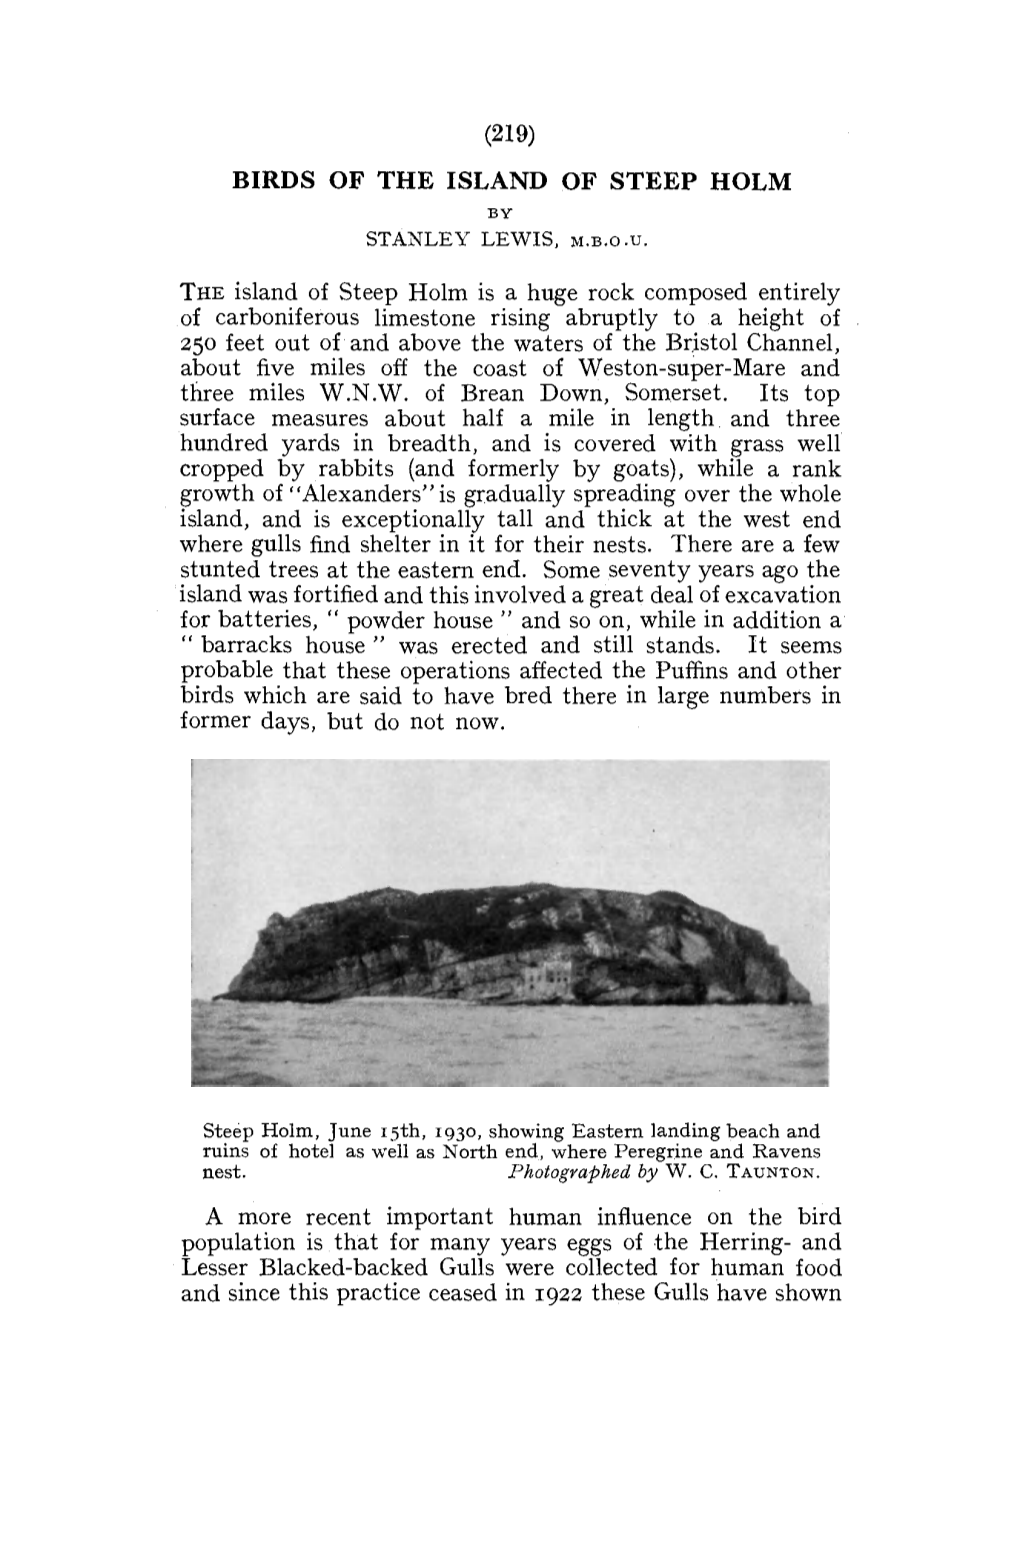 (219) Birds of the Island of Steep Holm by Stanley Lewis, M.B.O.U